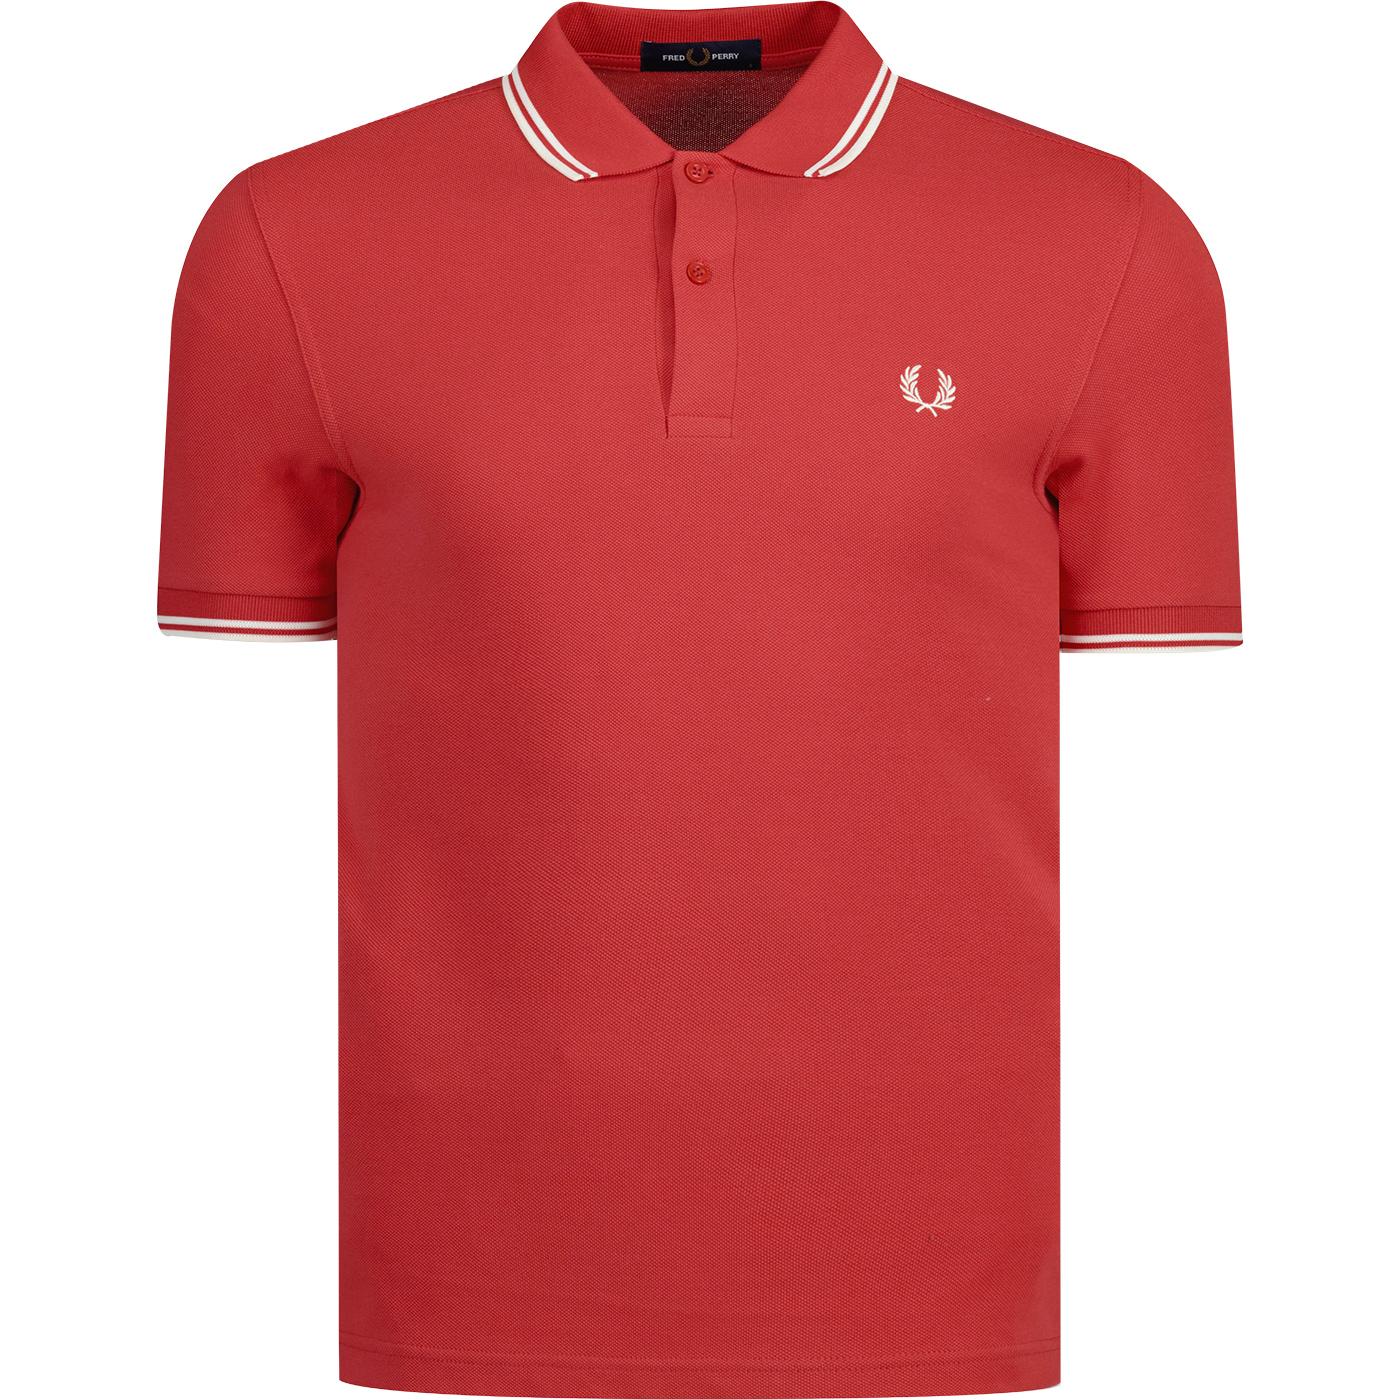 FRED PERRY M3600 Twin Tipped Mod Polo - Washed Red